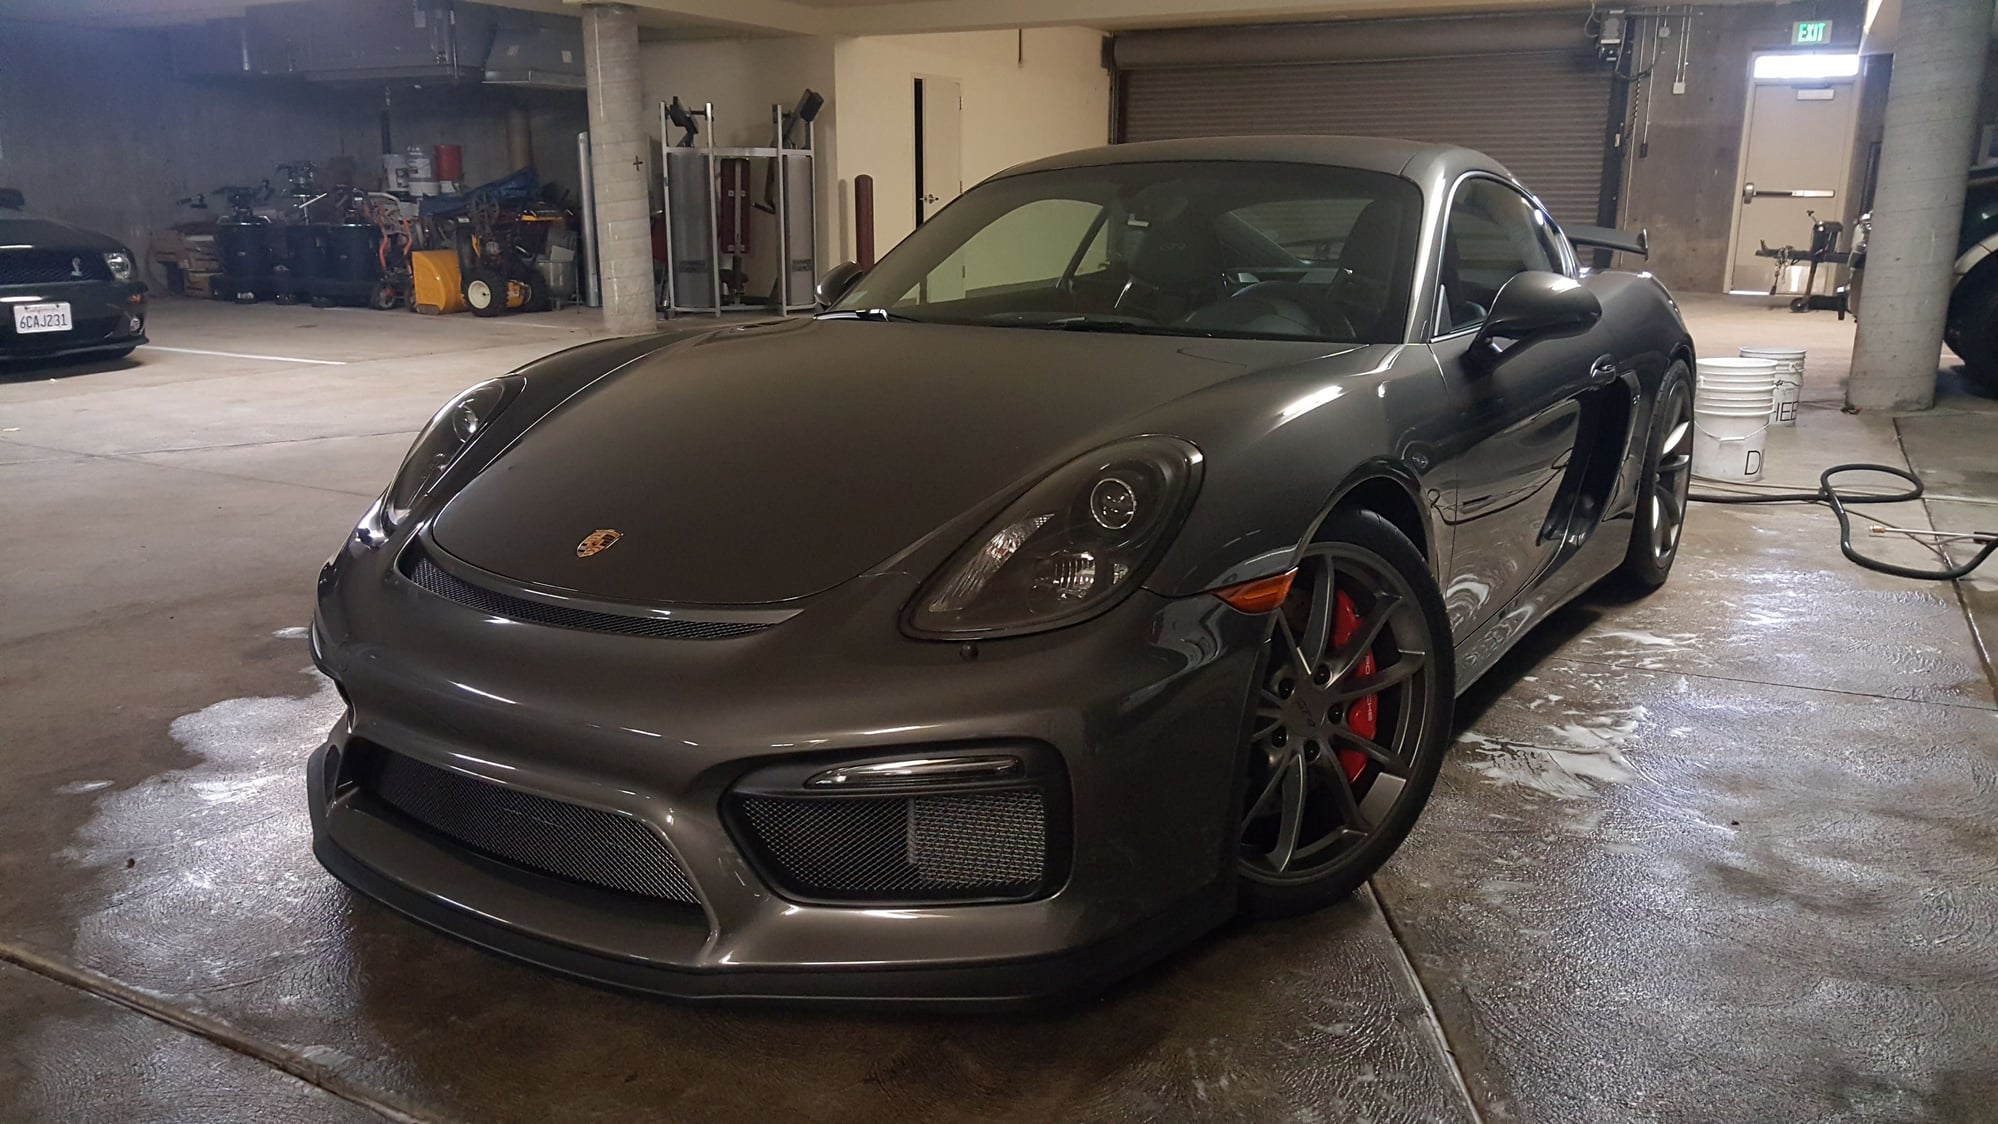 2016 Porsche Cayman GT4 - 2016 Porsche Cayman GT4 Agate LWB 1800 miles, Excellent condition, $120,000 - Used - Steamboat Springs, CO 80487, United States